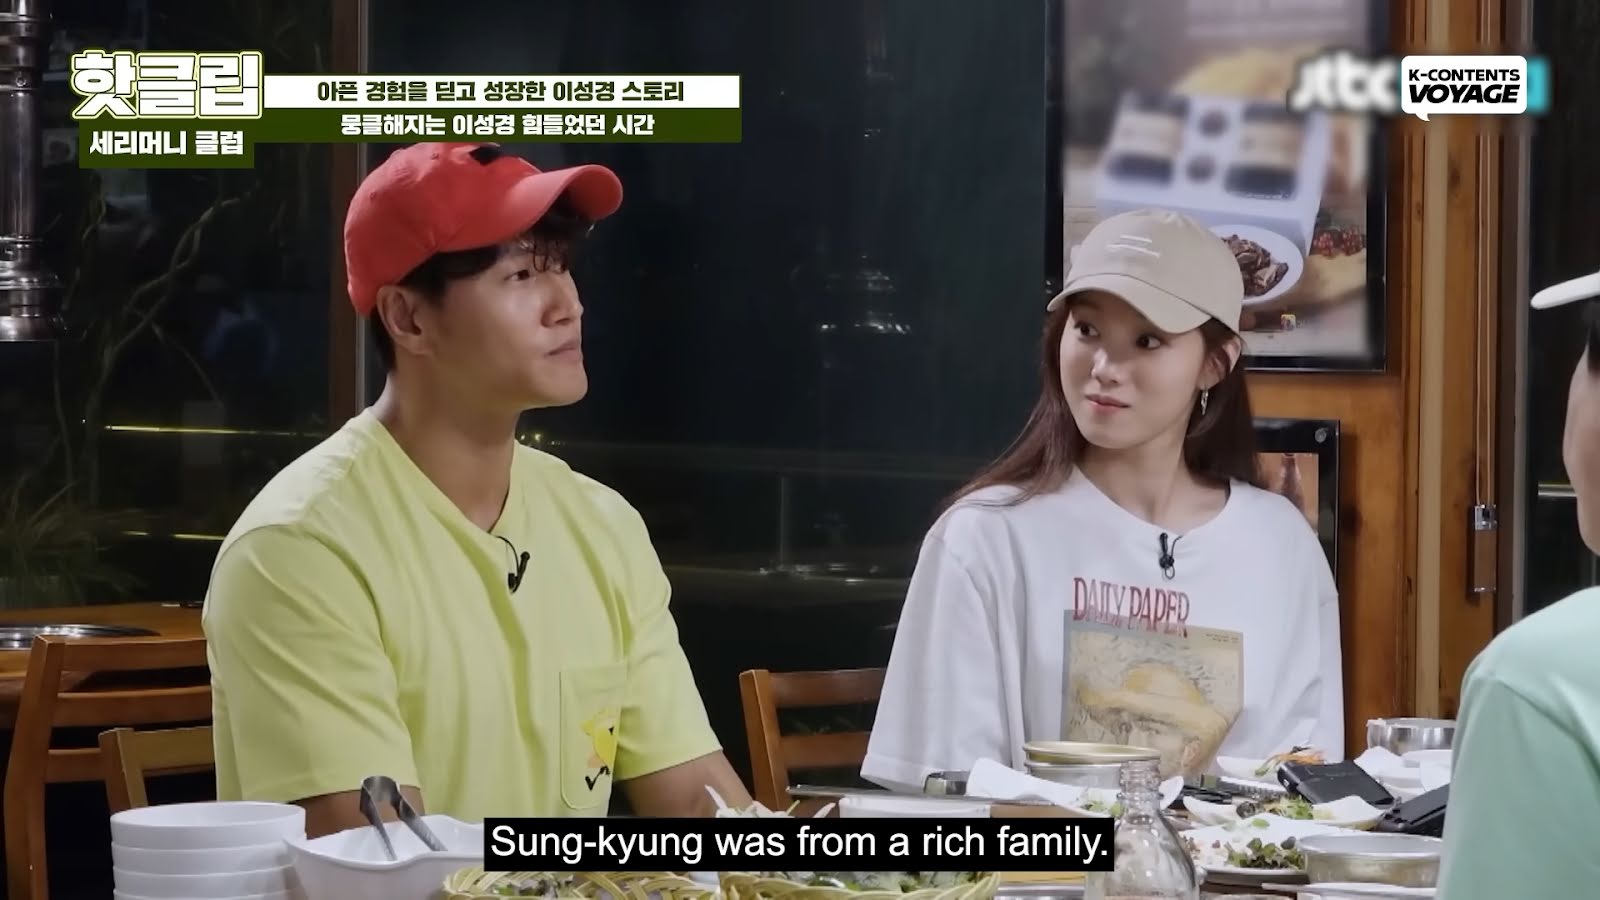 How did Lee Sungkyung succeed in a bankrupt family